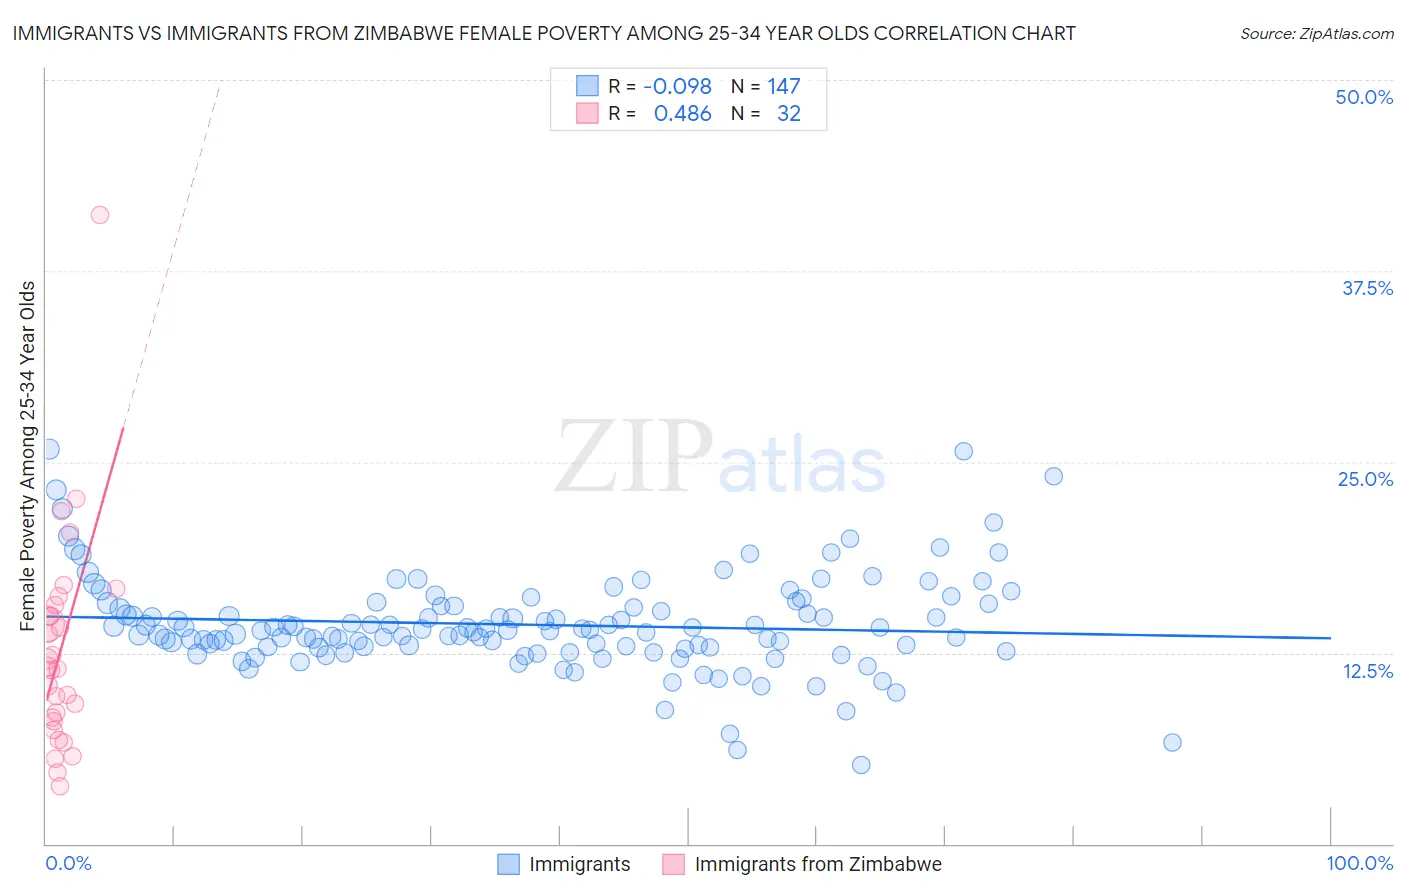 Immigrants vs Immigrants from Zimbabwe Female Poverty Among 25-34 Year Olds